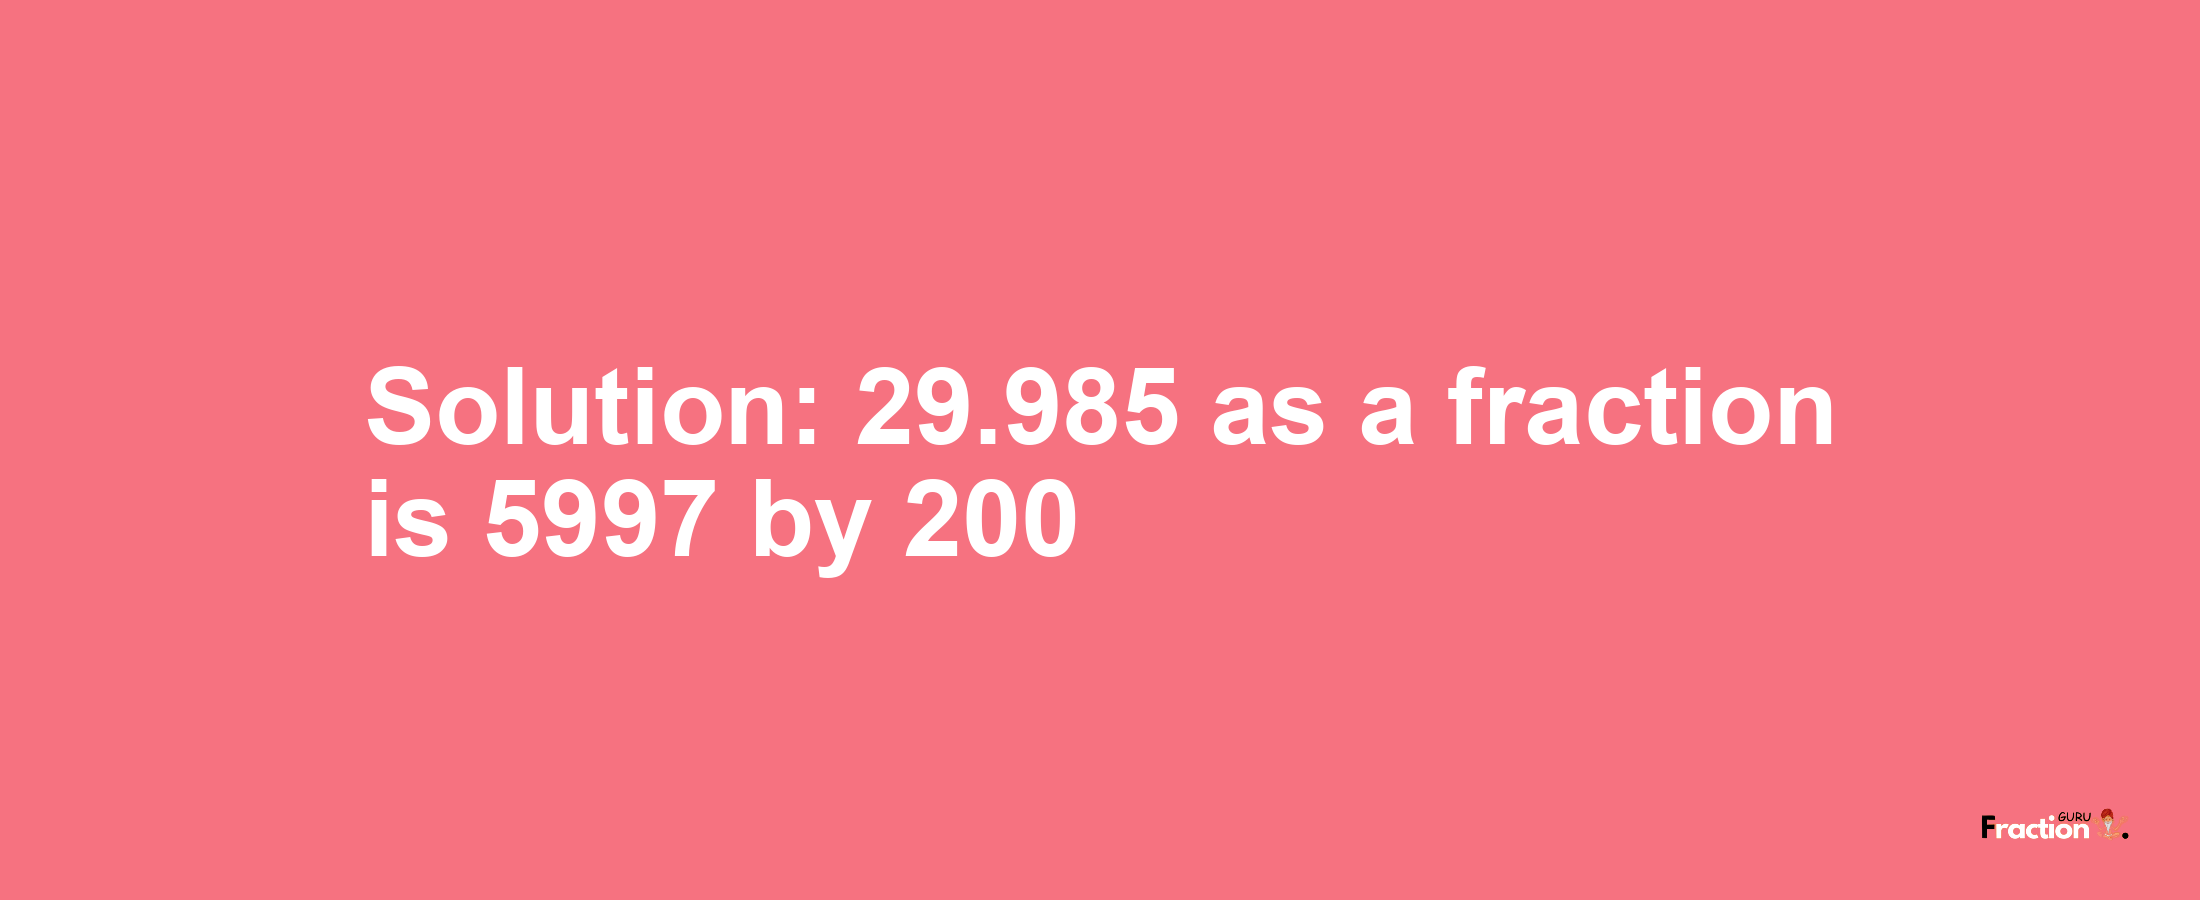 Solution:29.985 as a fraction is 5997/200